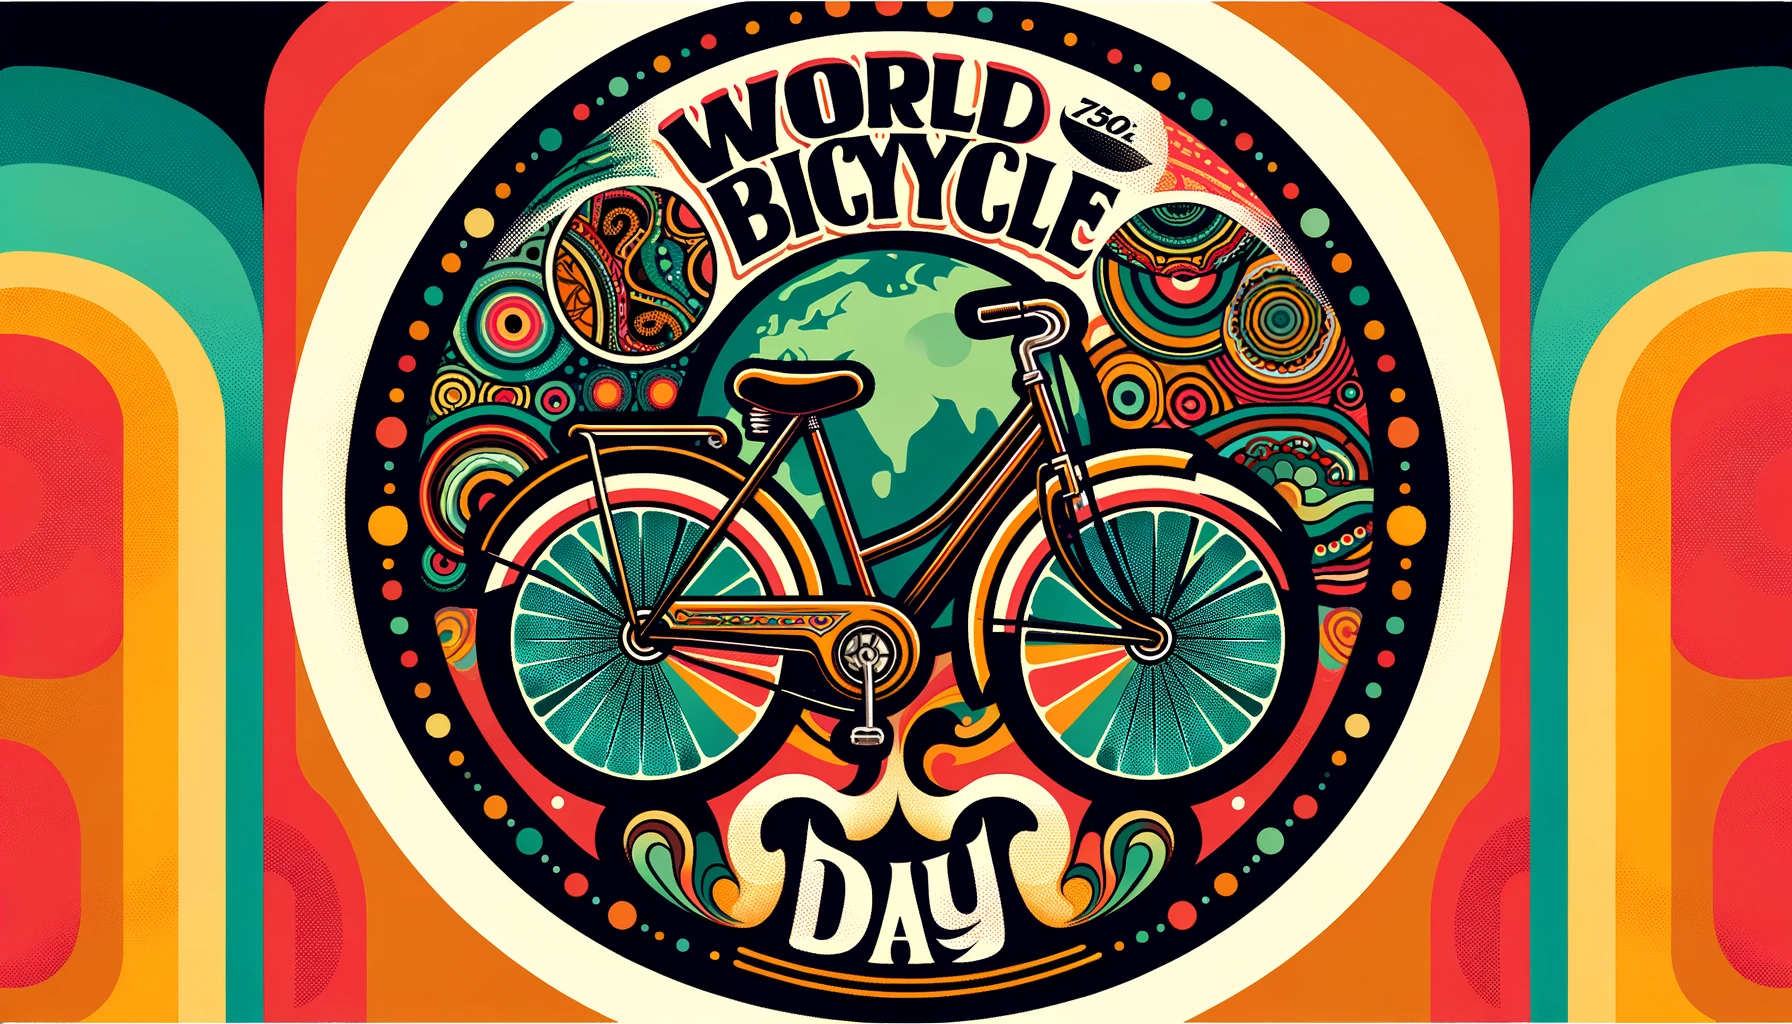 Supportive Quotes to Share on World Bicycle Day